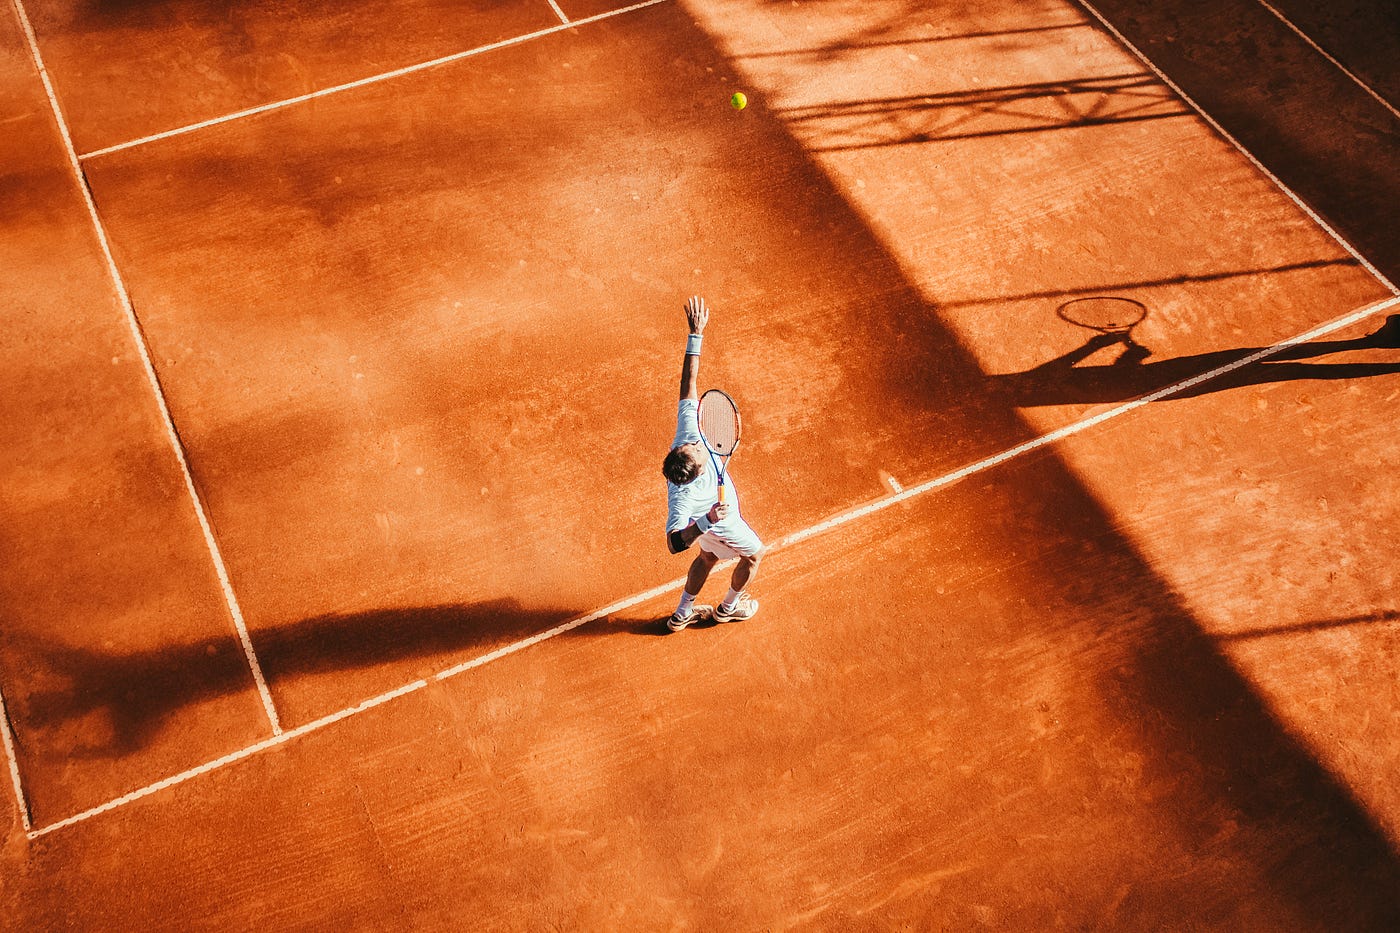 Simulating Tennis Matches with Python or Moneyball for Tennis | by Osho Jha  | Towards Data Science